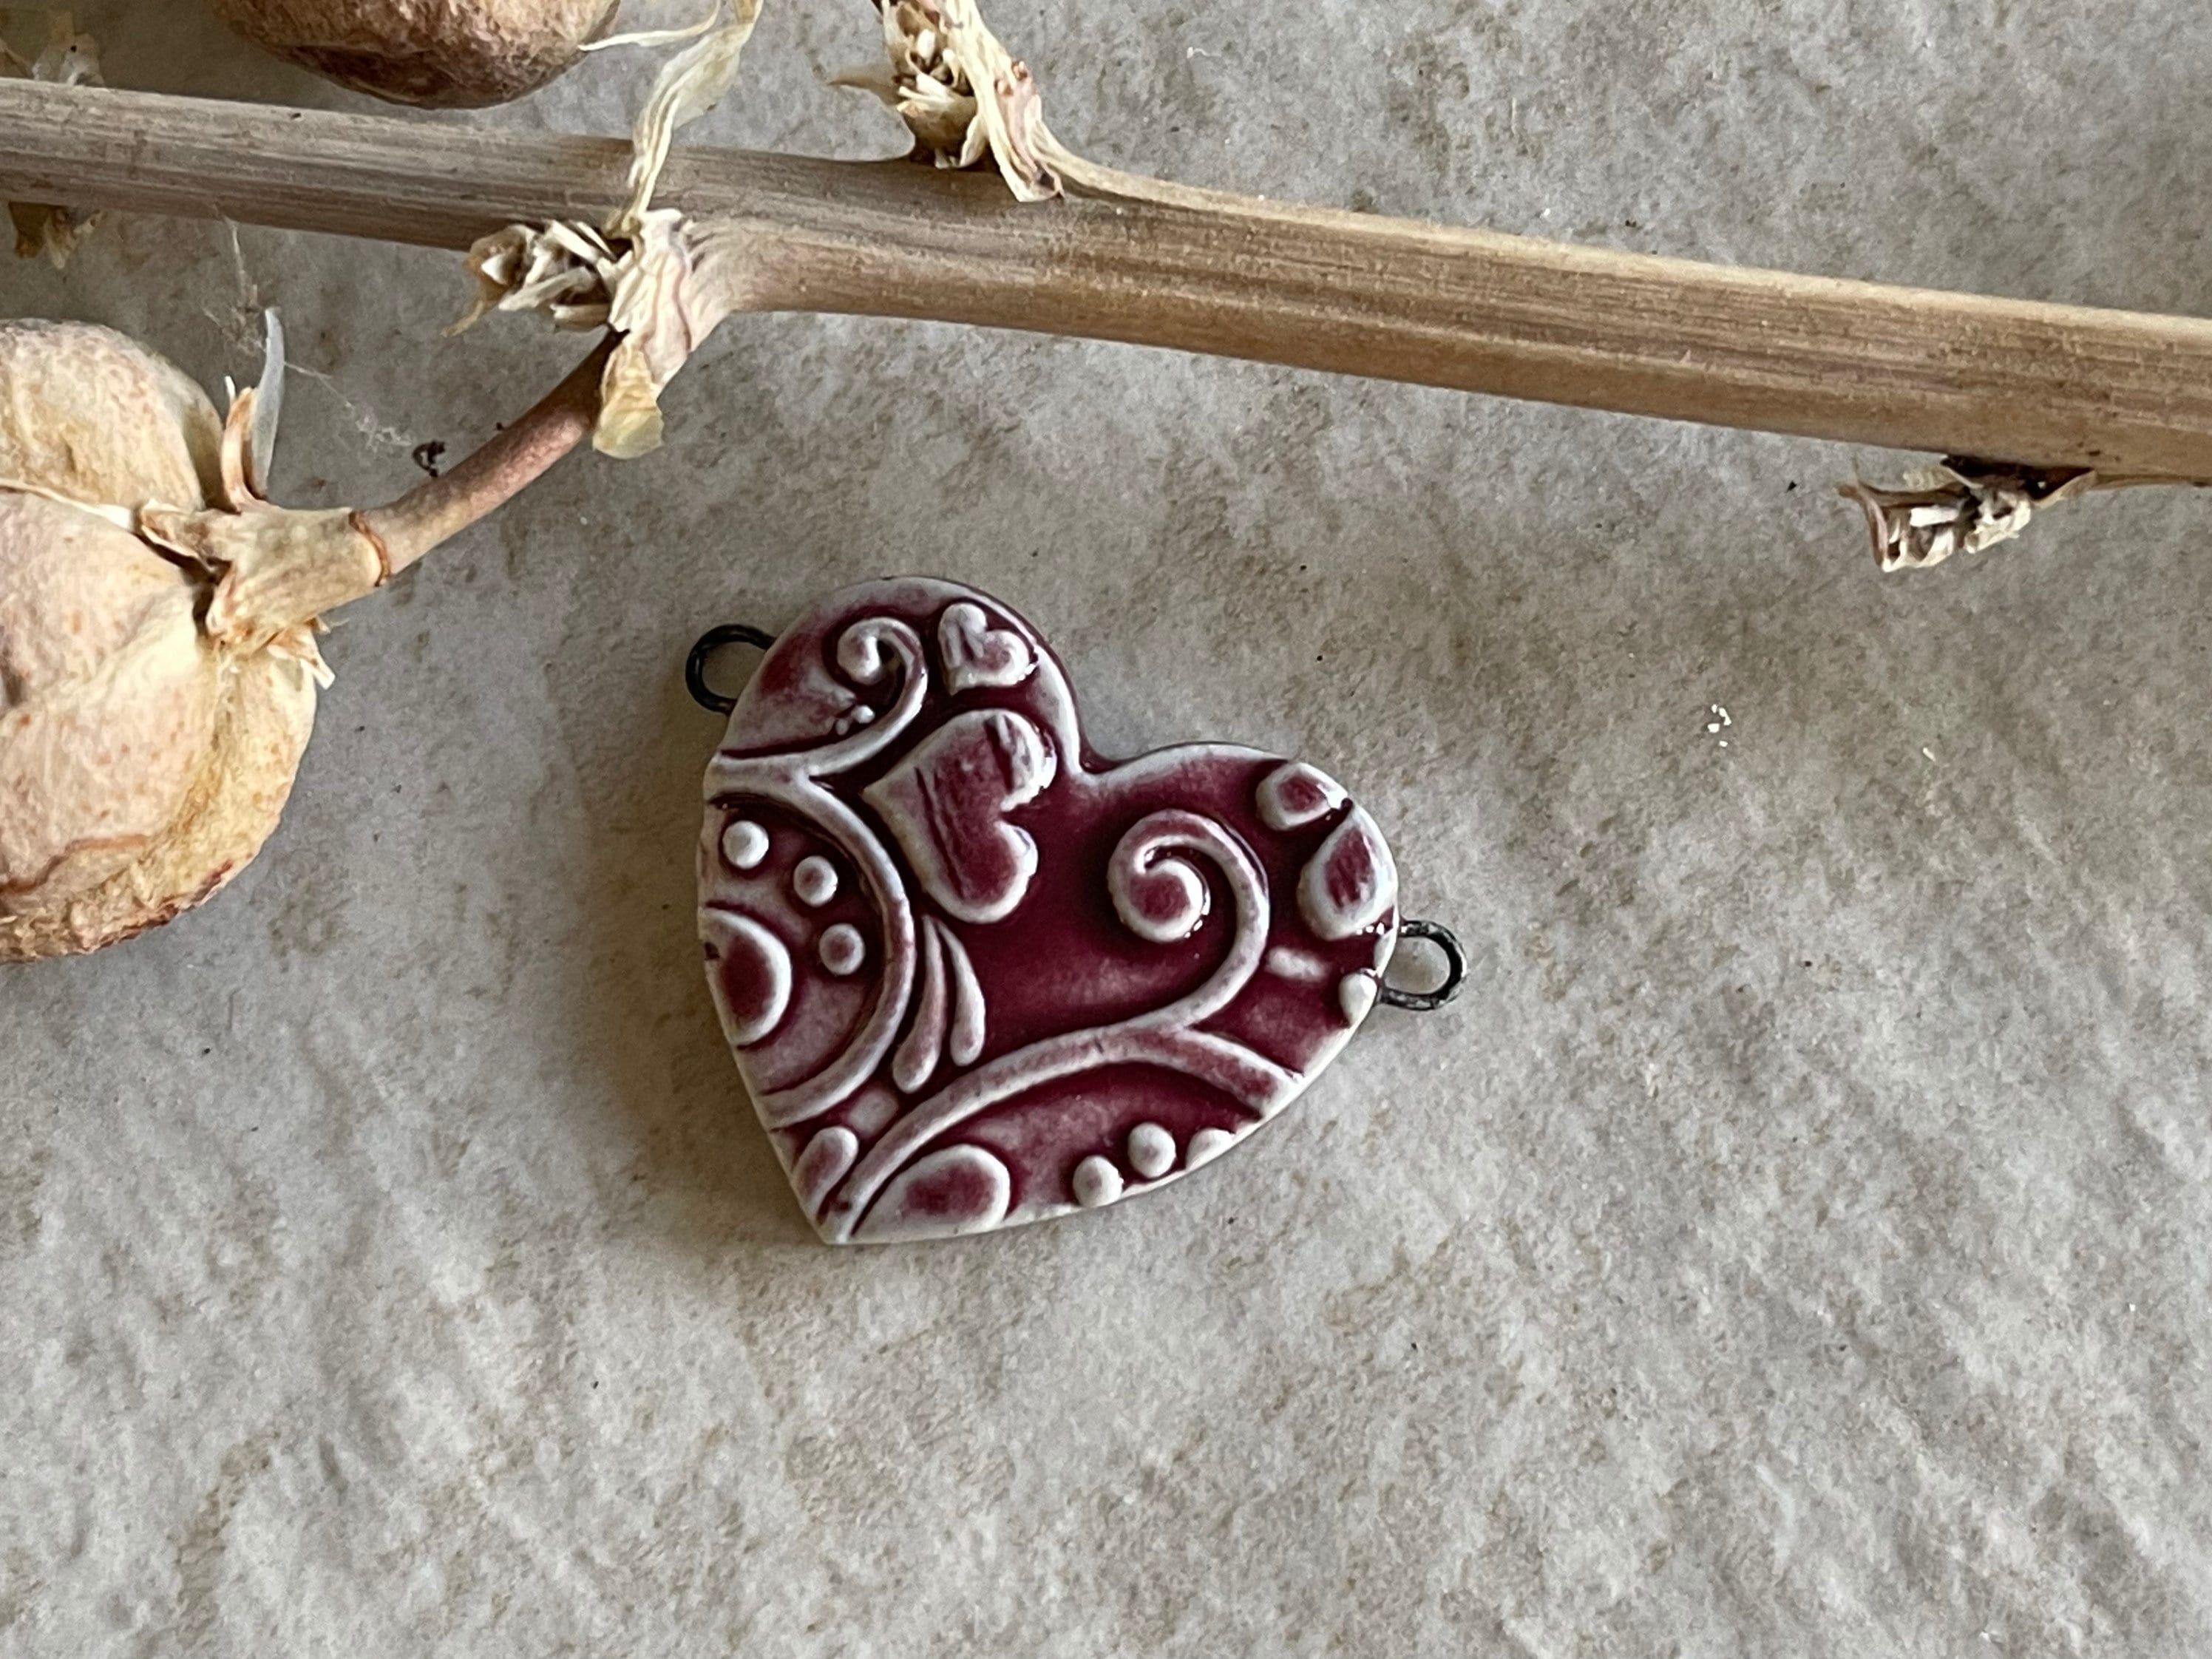 Burgundy Heart, Hearts and Butterflies, Double Wire Heart Pendant, Porcelain Ceramic Pendant, Artisan Pendant, Jewelry Making Components